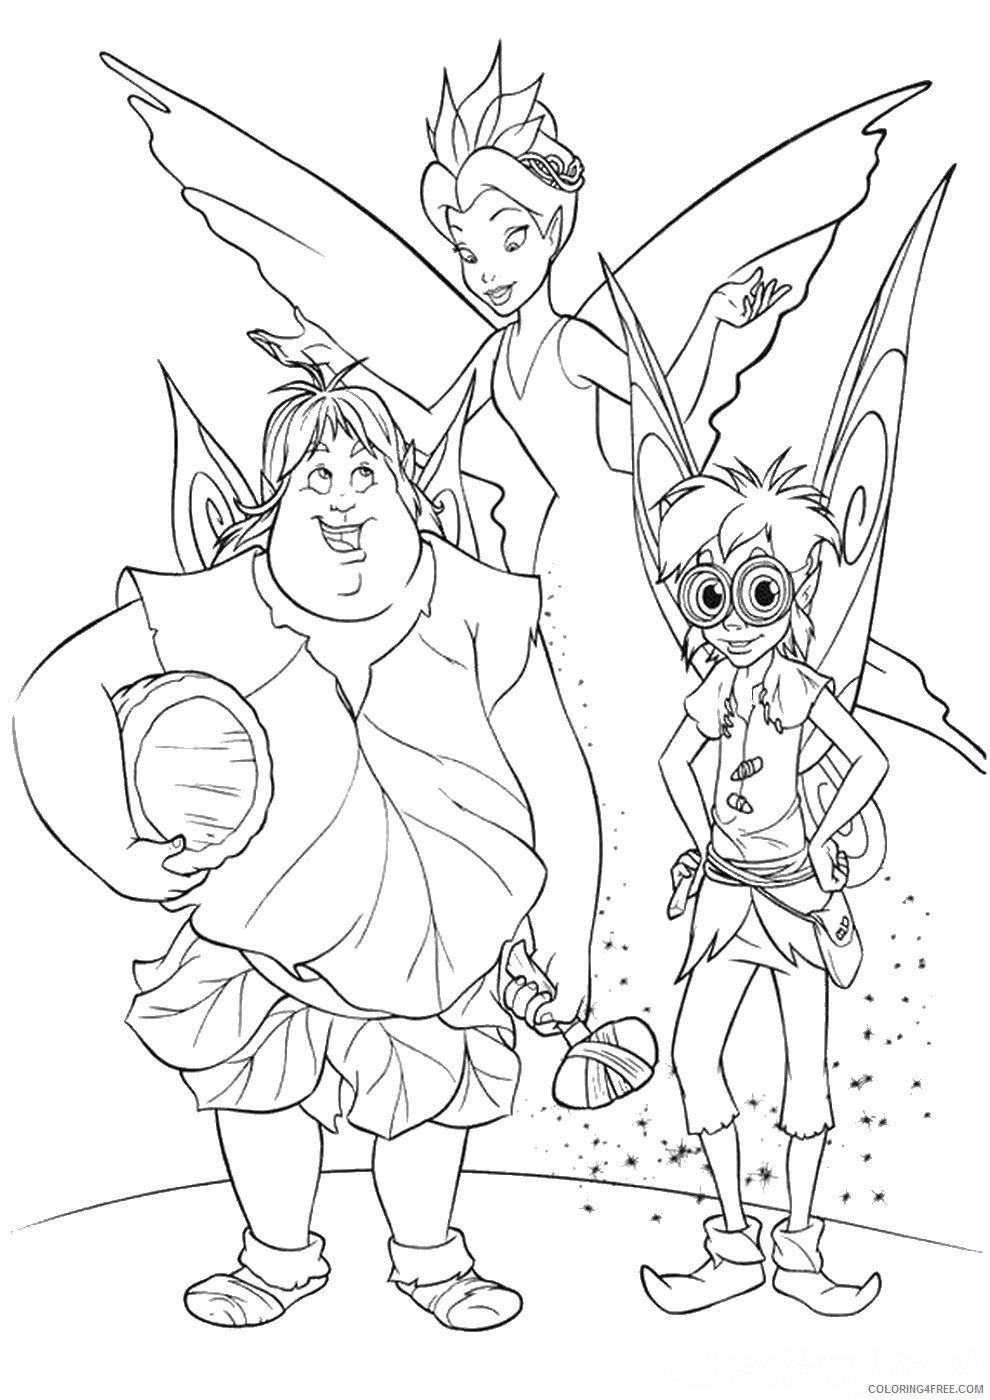 Tinker Bell Coloring Pages Cartoons tinkerbell_cl_15 Printable 2020 6622 Coloring4free